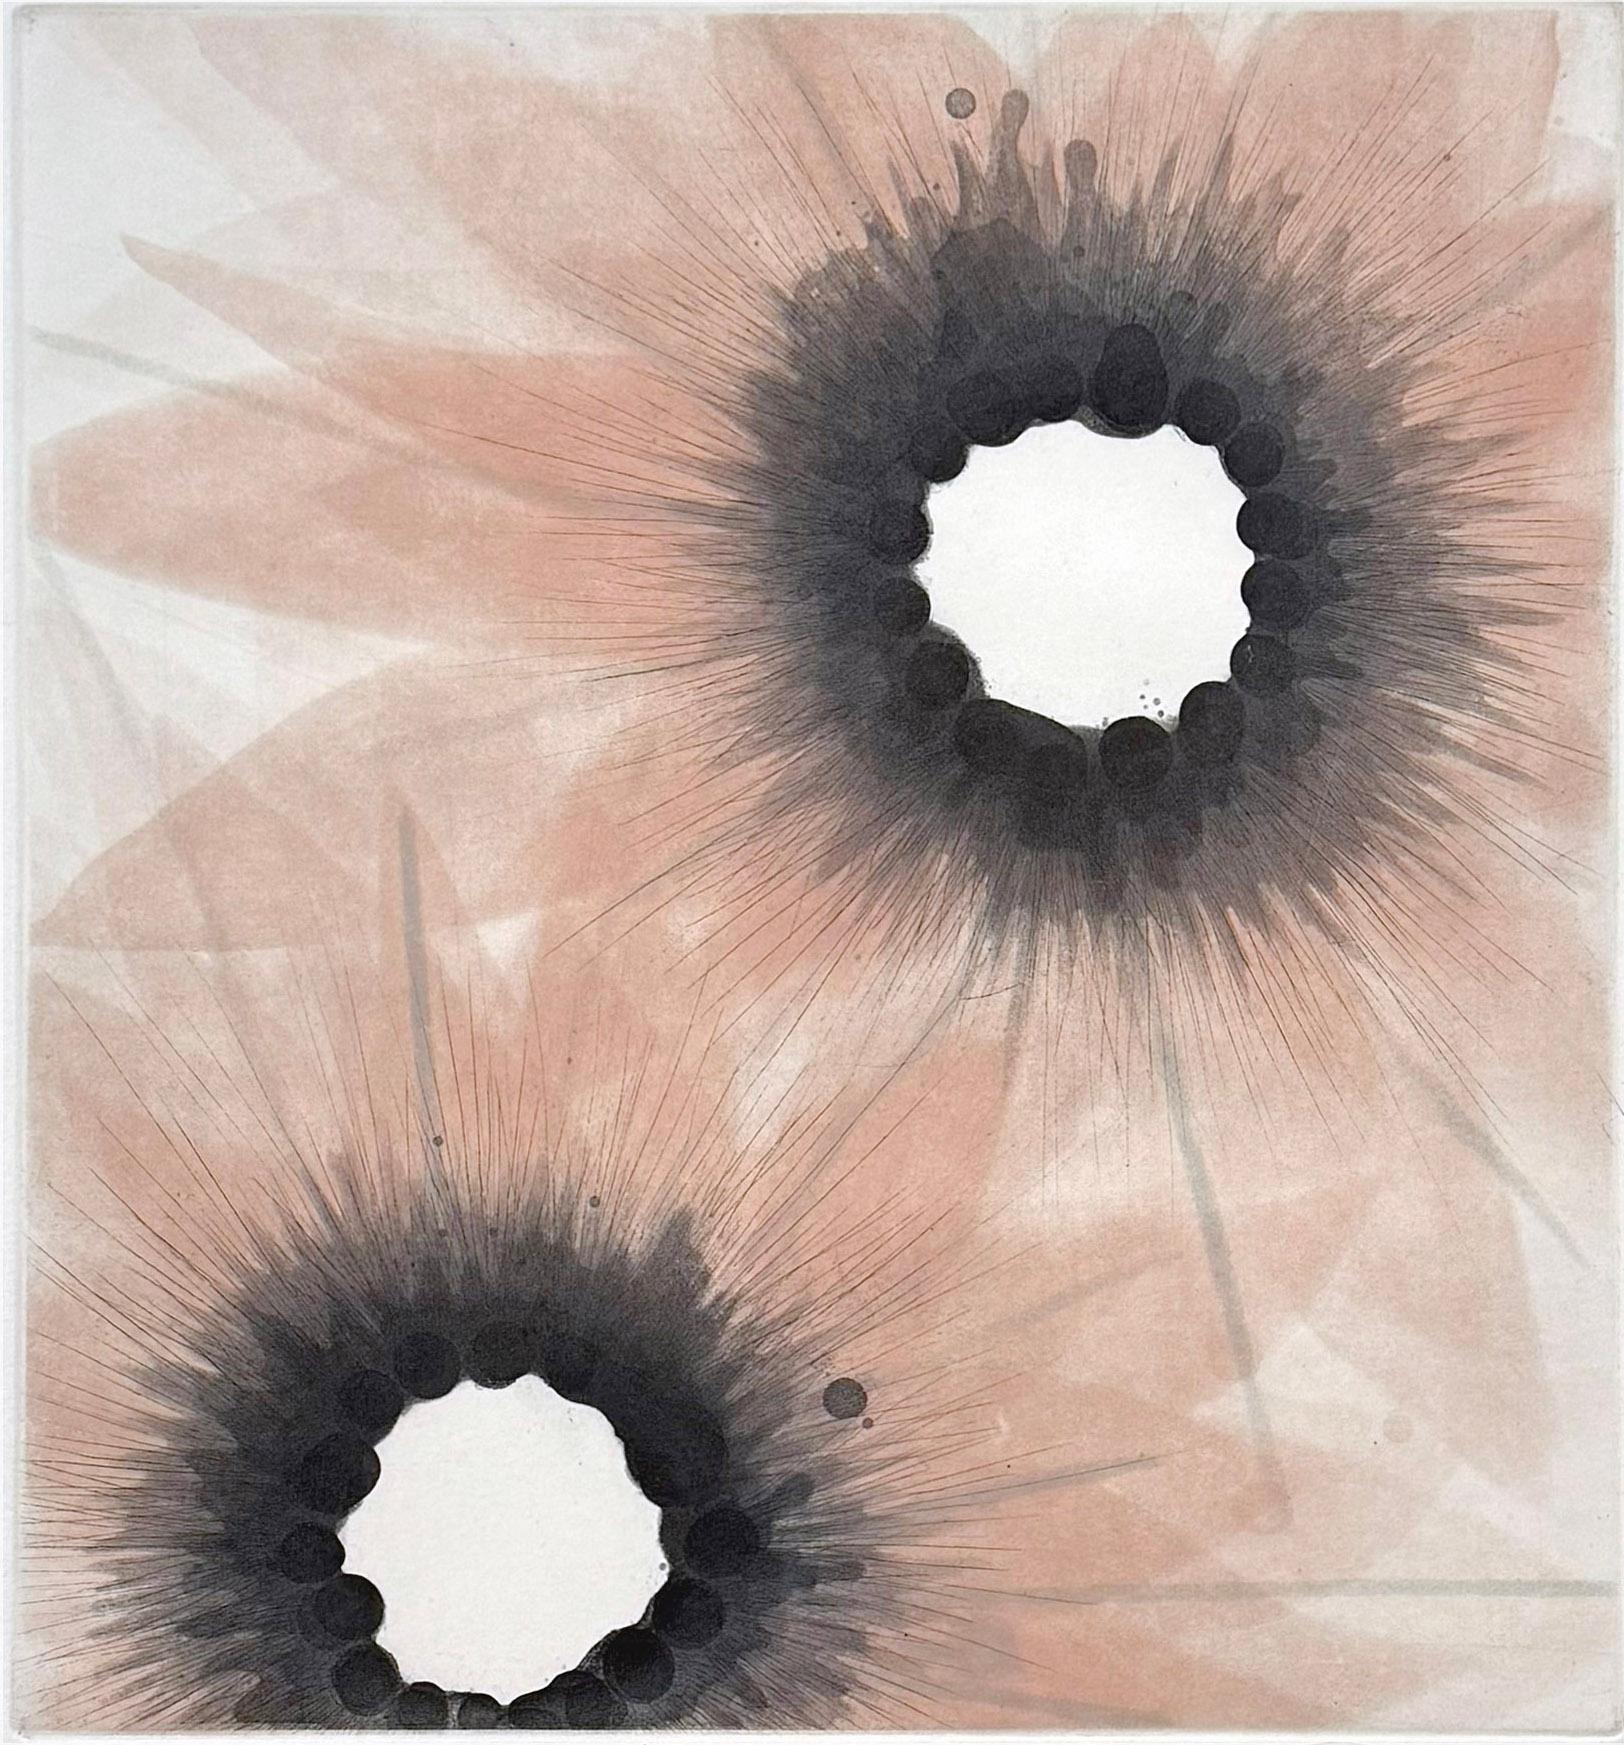 Medium: Etching,Aquatint
Image size: 12 × 11 
Sheet size: 22 × 18 in 
Edition of 30
Year: 2008
Signed and titled by the artist

While inspired by flowers, the blossom series shows the artist's penchant for abstract patterns. Signed, titled and